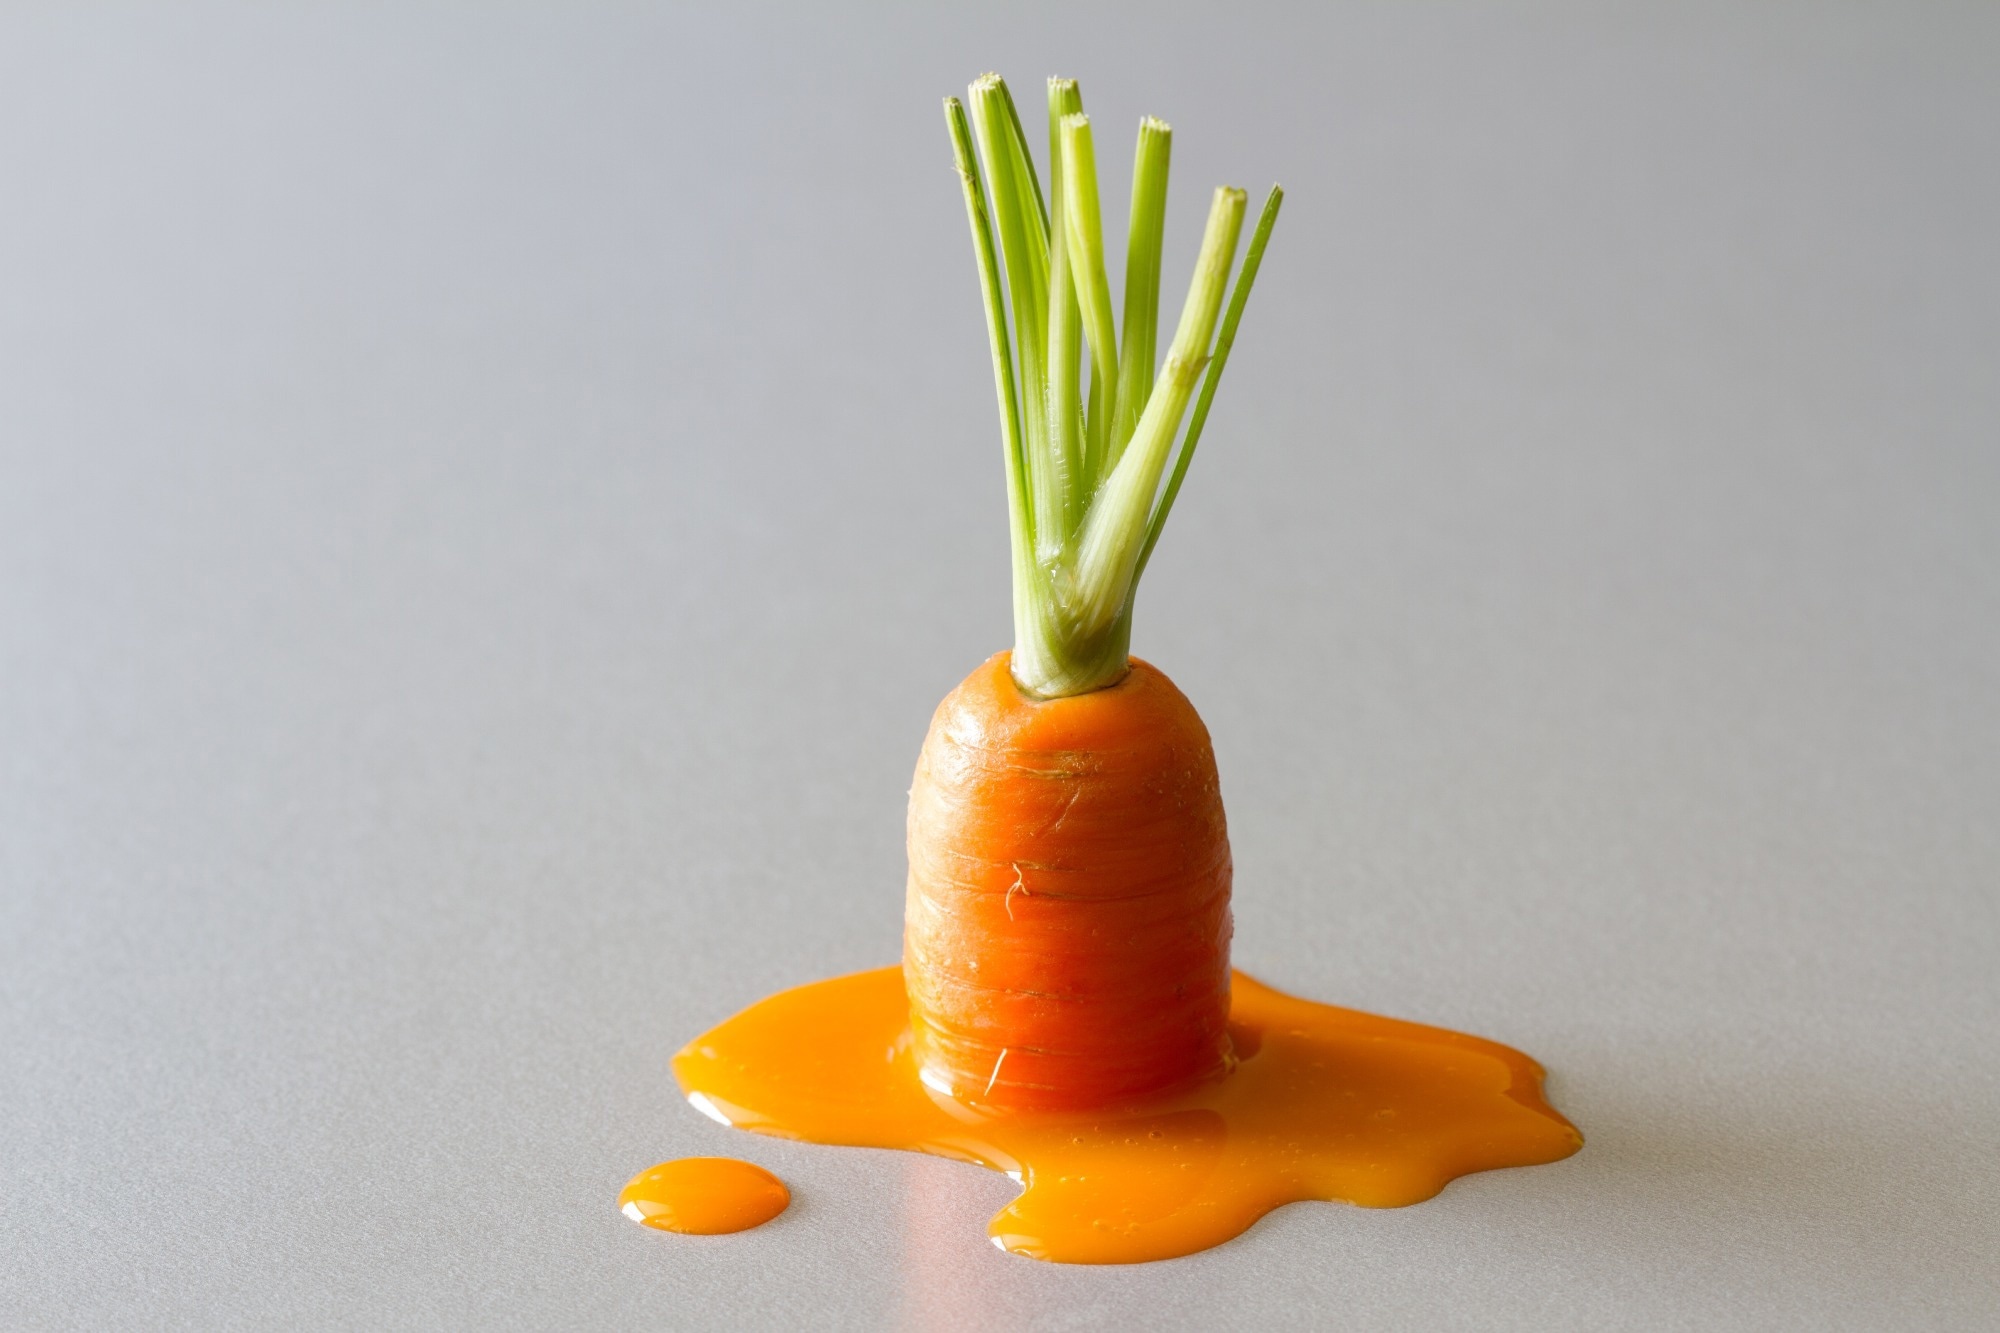 Study: Carrot Juice Intake Affects the Cytokine and Chemokine Response in Human Blood after Ex Vivo Lipopolysaccharide-Induced Inflammation. Image Credit: udra11 / Shutterstock